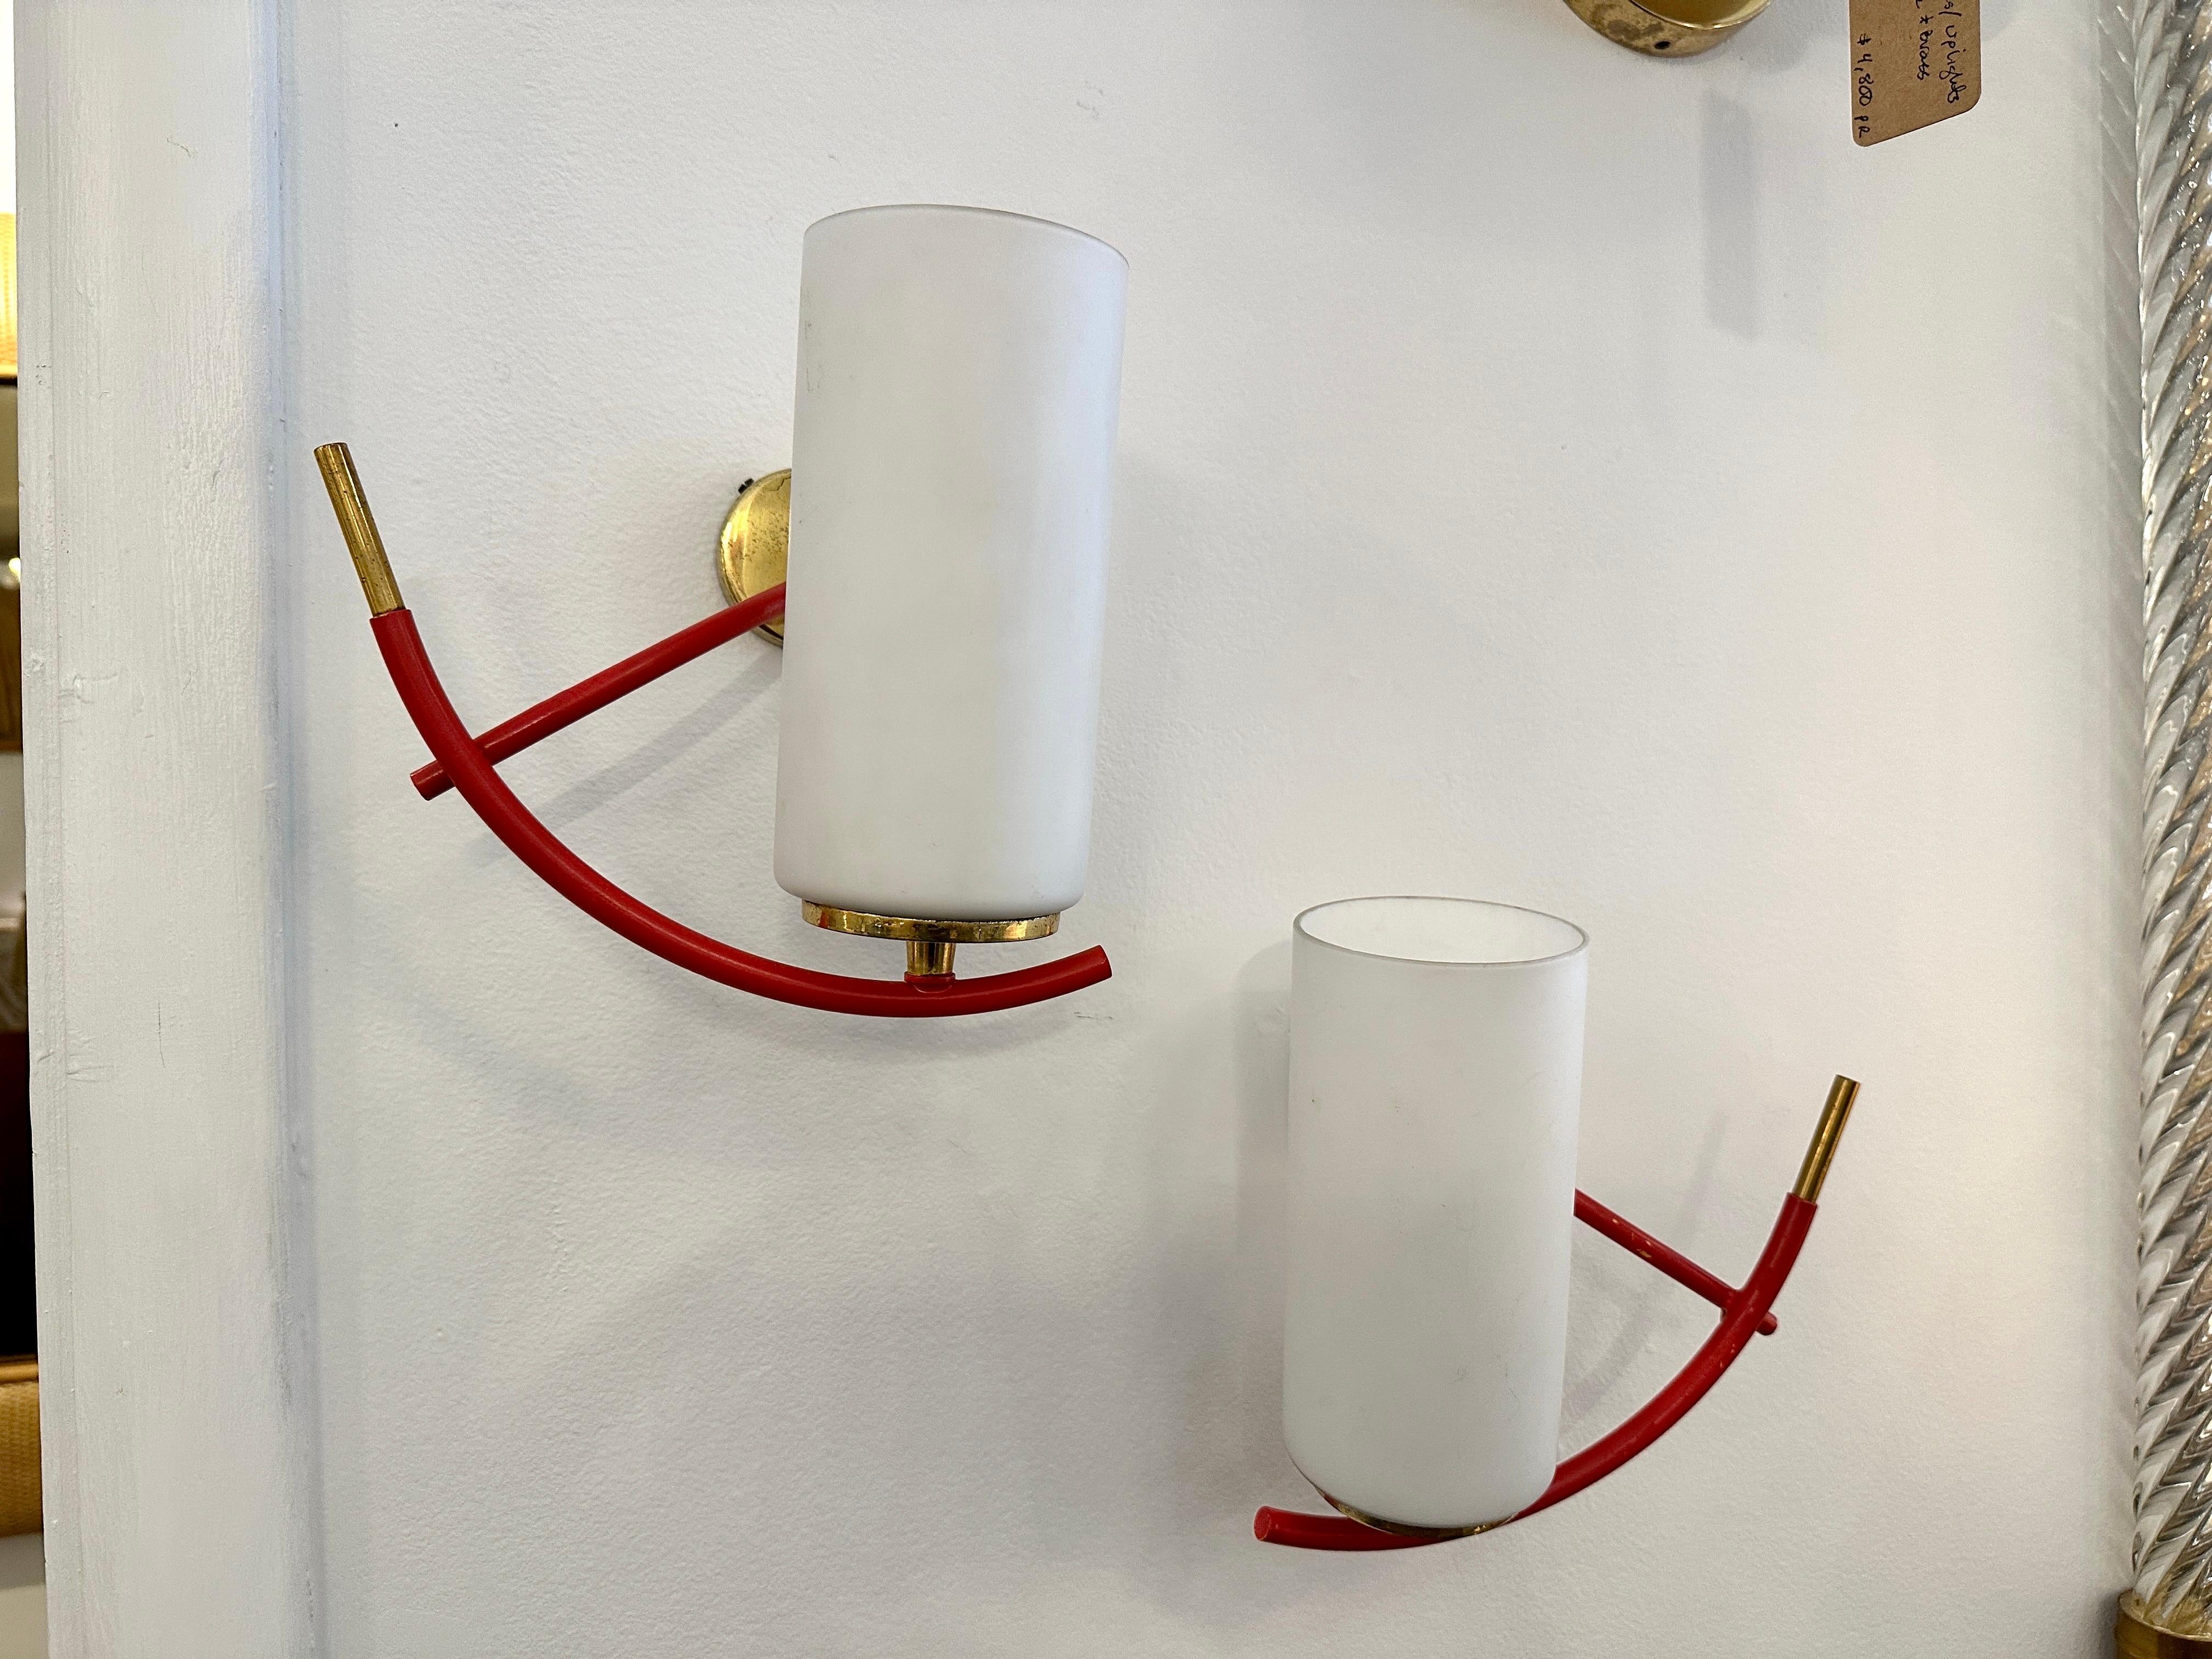 Maison Arlus Red Sconces w/ Brass & Cylinder Opaline Shades Art Deco, Pair In Good Condition For Sale In East Hampton, NY